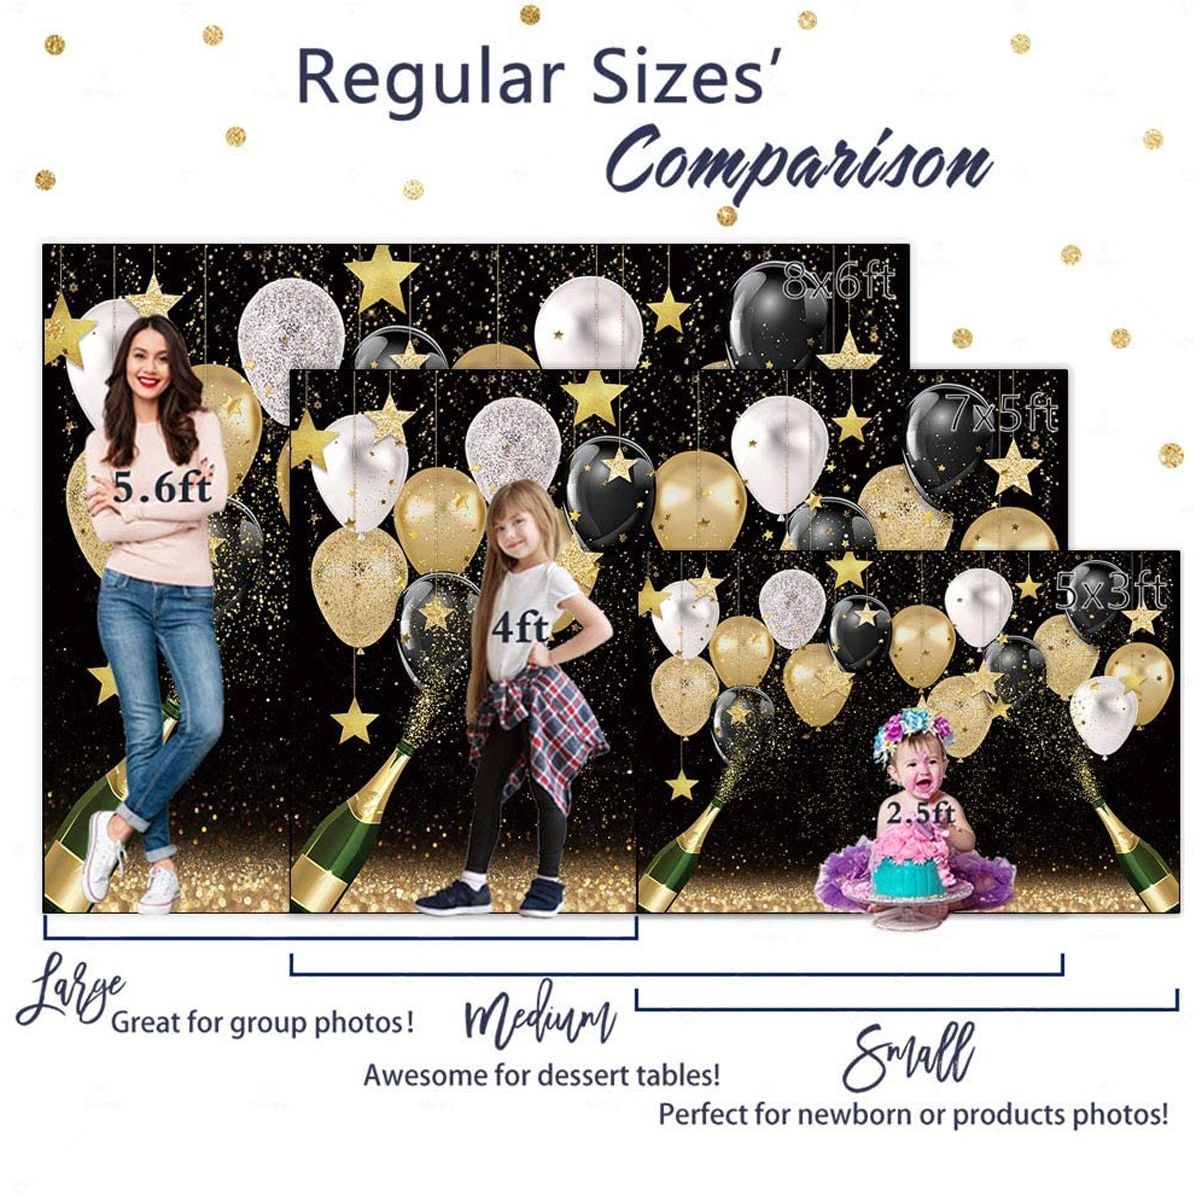 Fabric-Black-Golden-Balloon-Backdrops-Party-Decorations-Happy-Birthday-Banner-Favors-1723733